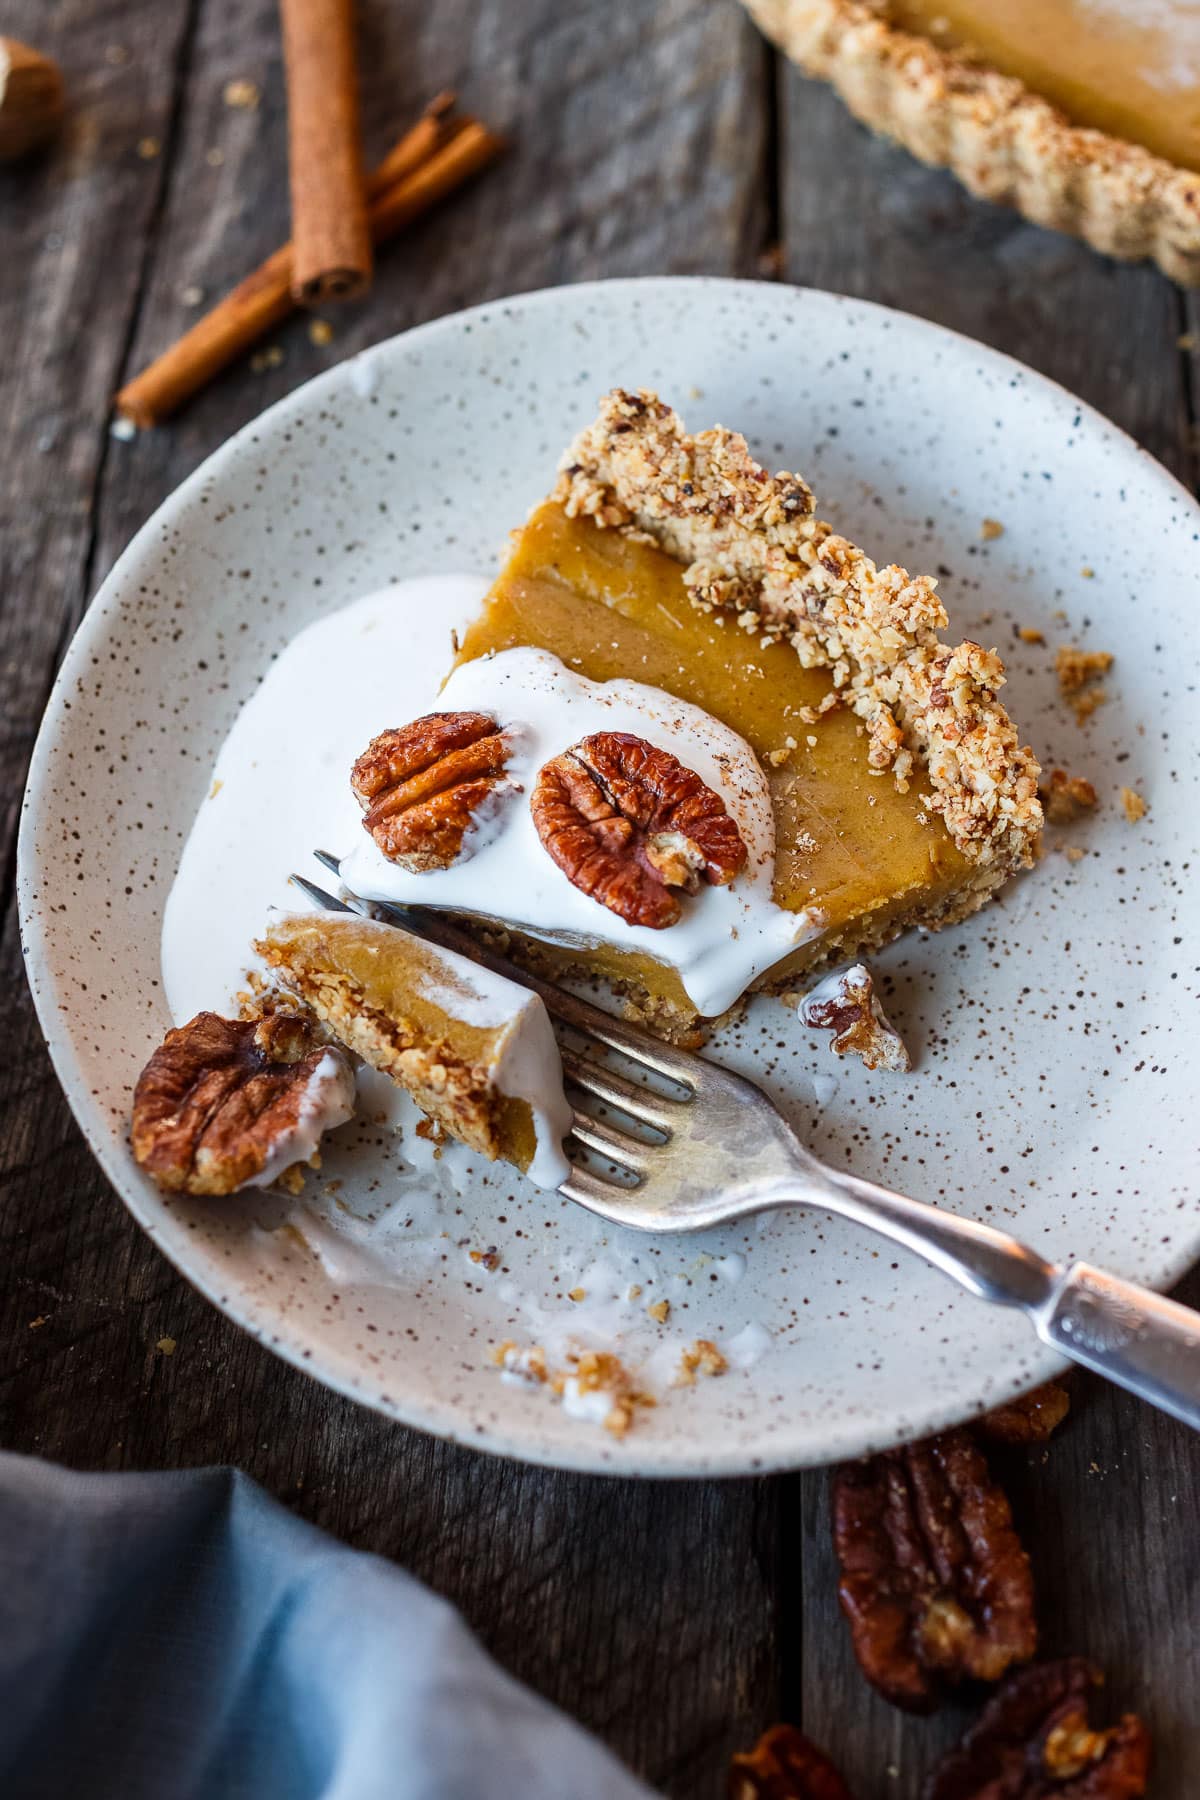 Decadent Vegan Pumpkin Tart w/ silky smooth pumpkin filling and a toasted pecan oat crust. Richly spiced, easy to make, and freezes beautifully. Richly spiced, easy to make, and freezes beautifully. Perfect for the holidays!